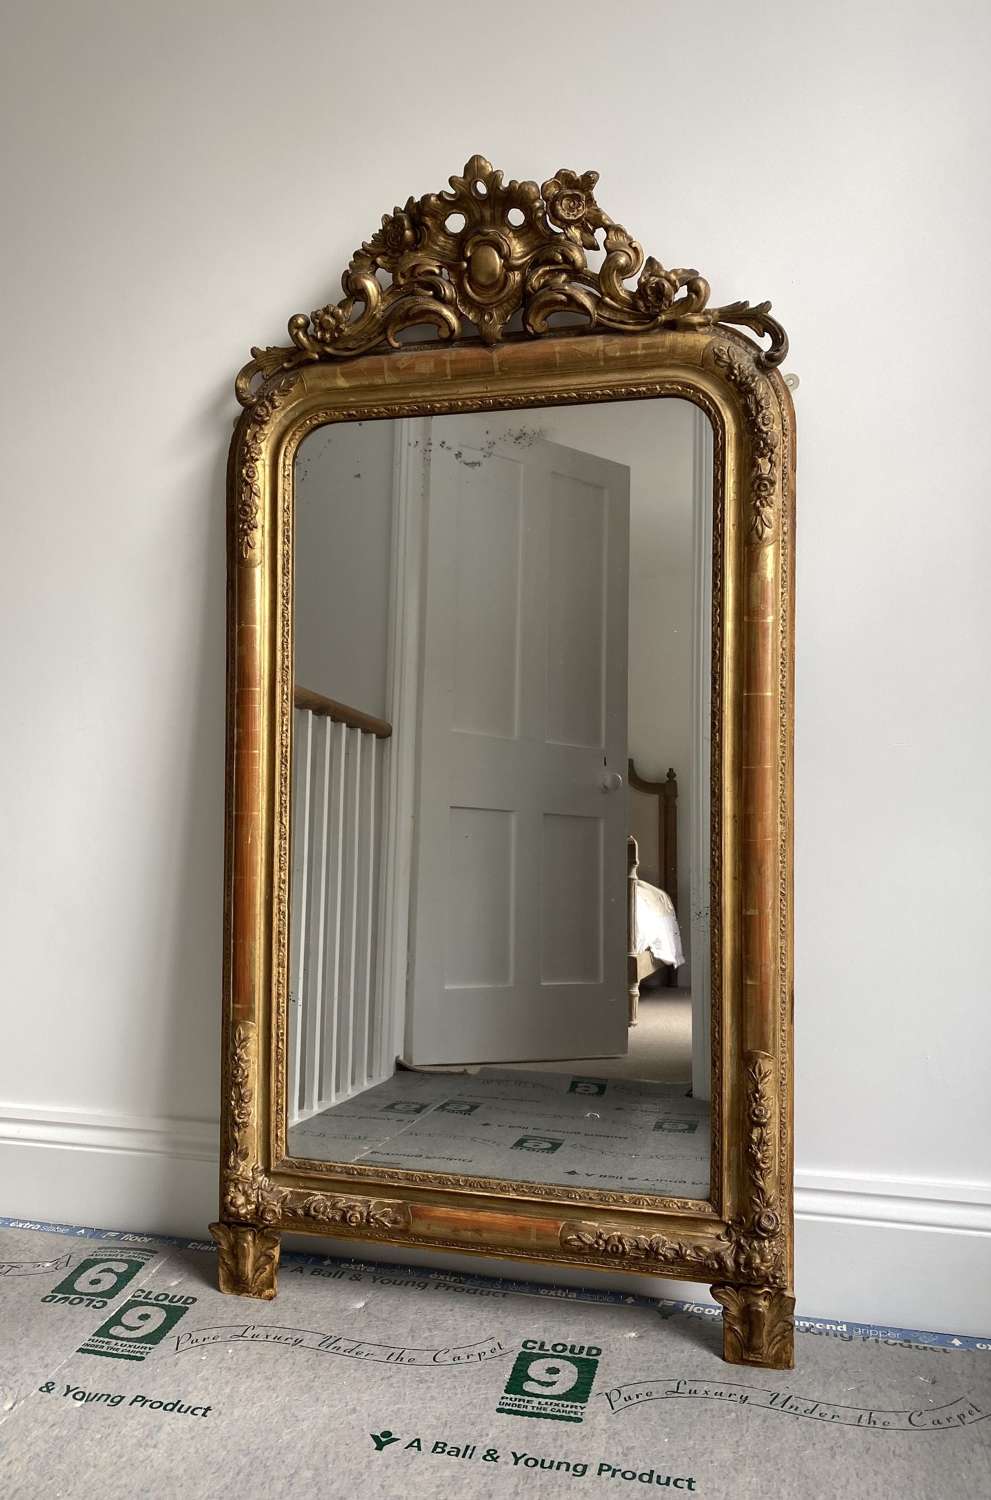 Quality Victorian French Mirror - Completely Original-Superb Condition